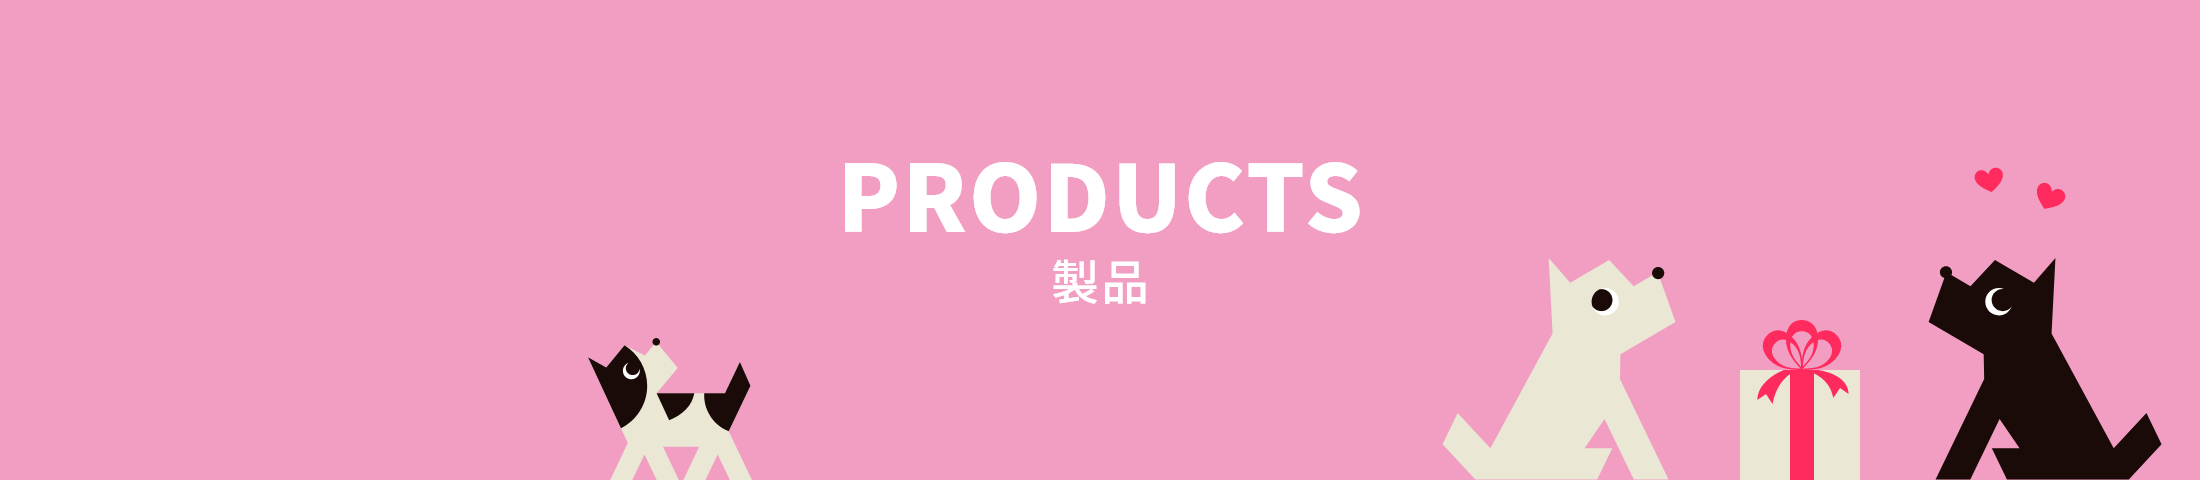 PRODUCTS 製品